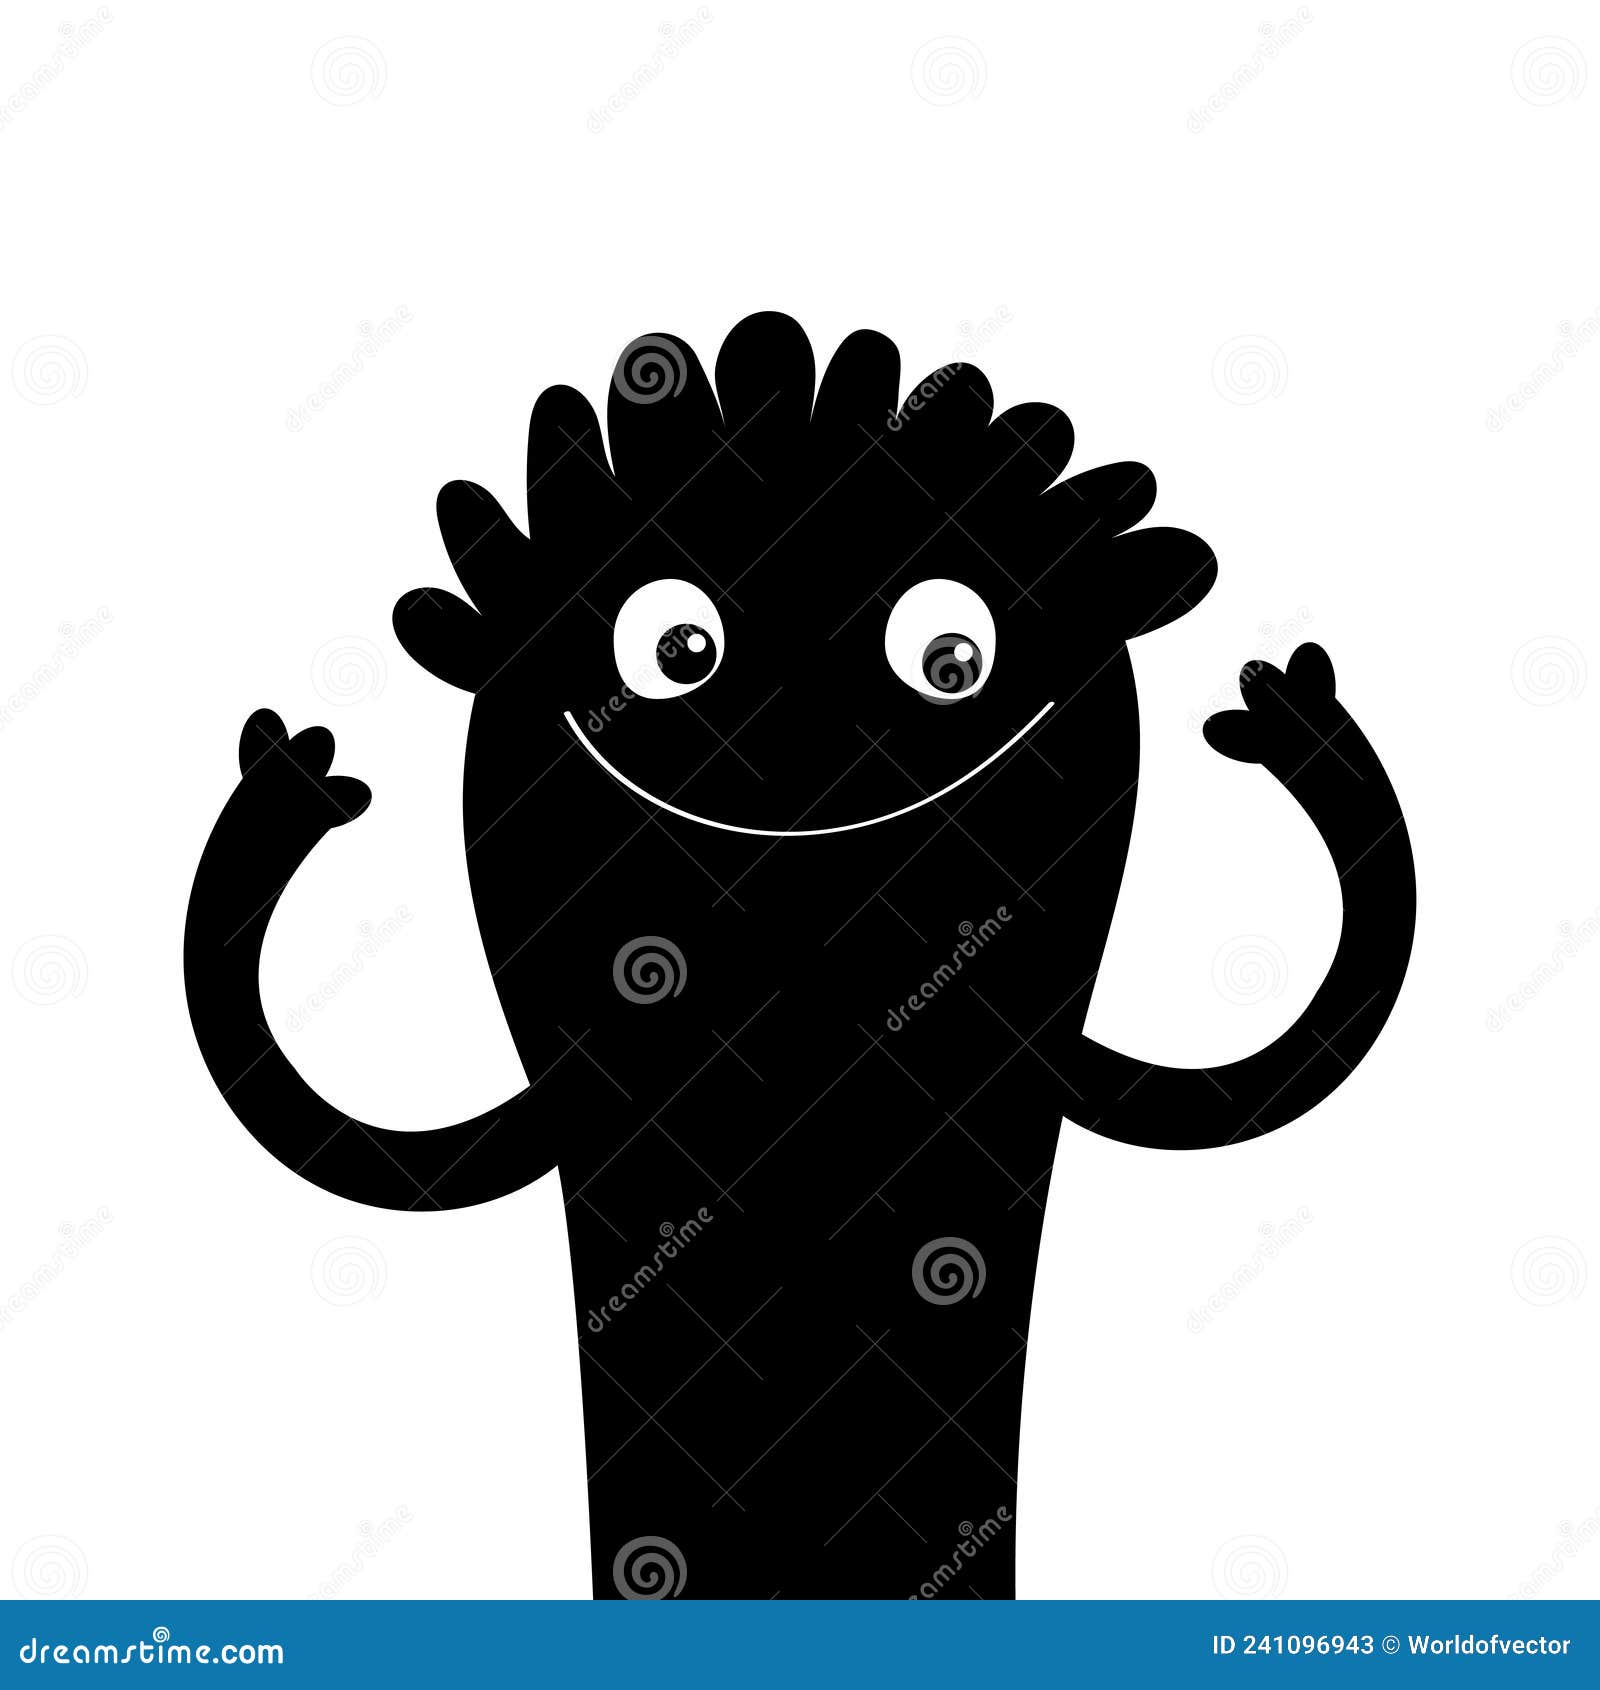 Happy Halloween. Monster Black Head Face Silhouette. Hands Up. Two Eyes,  Happy Mouth, Hair Fur Stock Vector - Illustration of kawaii, holiday:  241096943